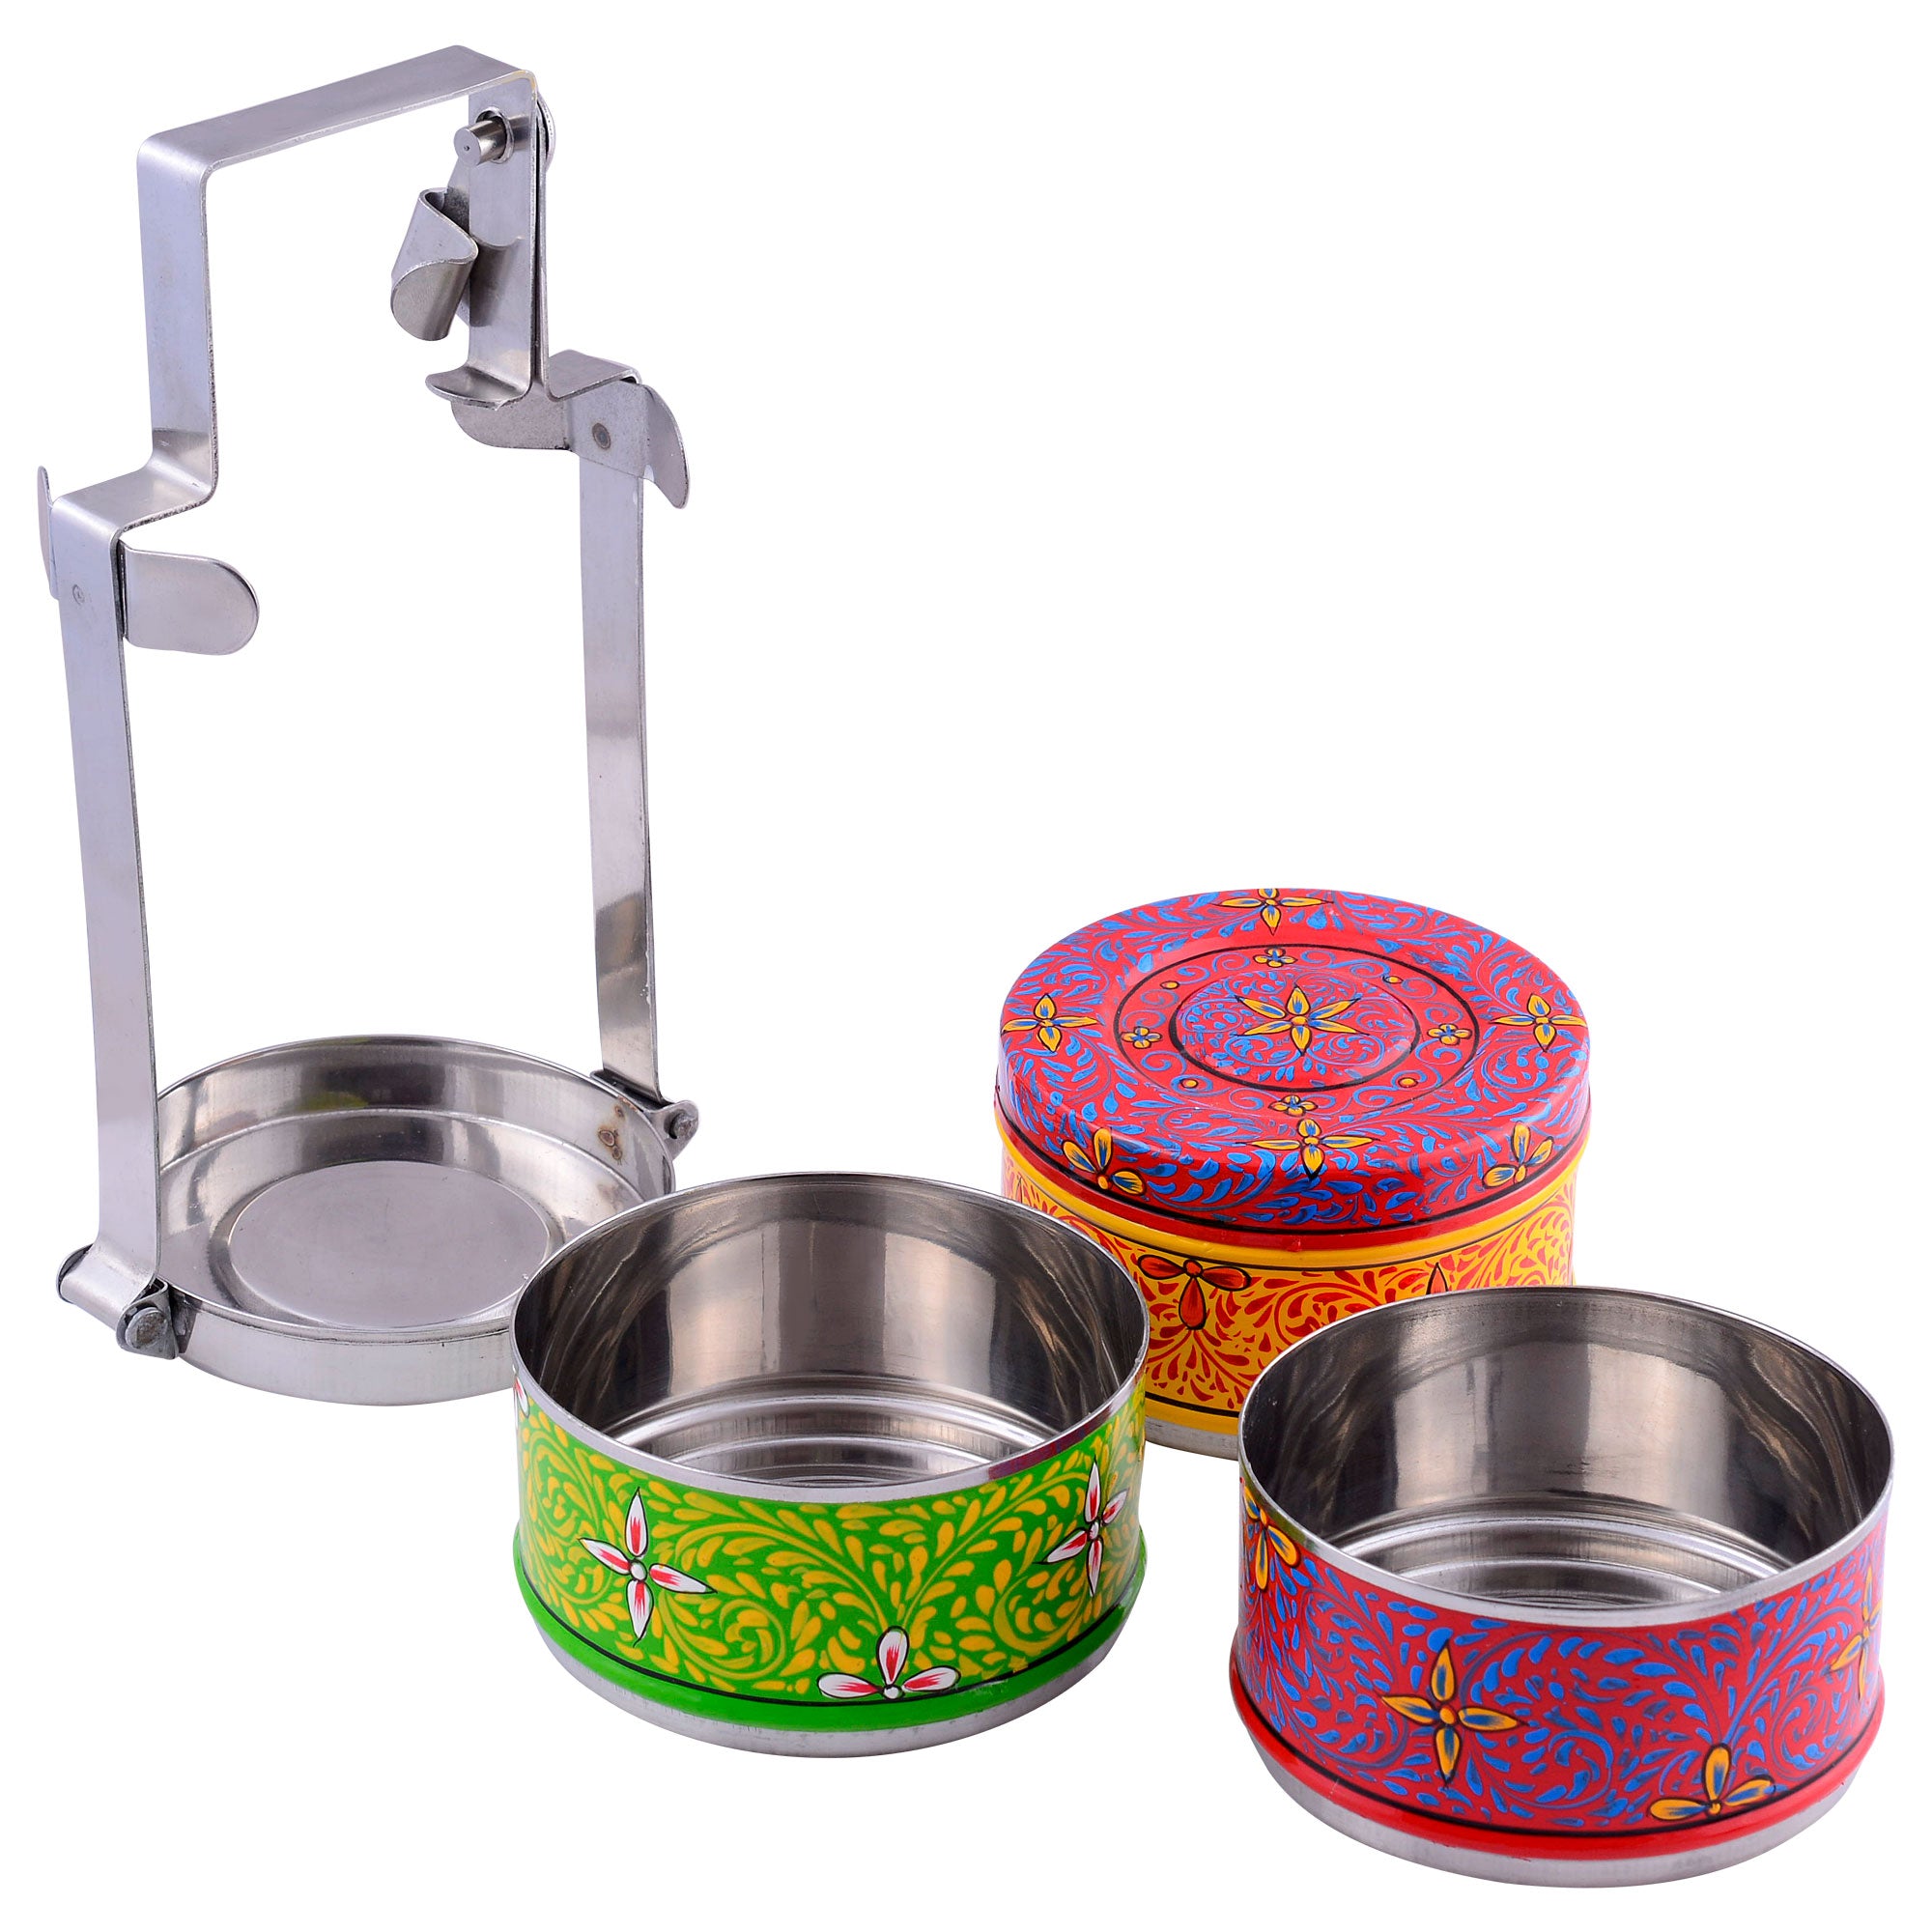 Hand Painted 3 Tier Steel Lunch Box- A dabba, or Indian-style tiffin carrier, Bombay Dabba